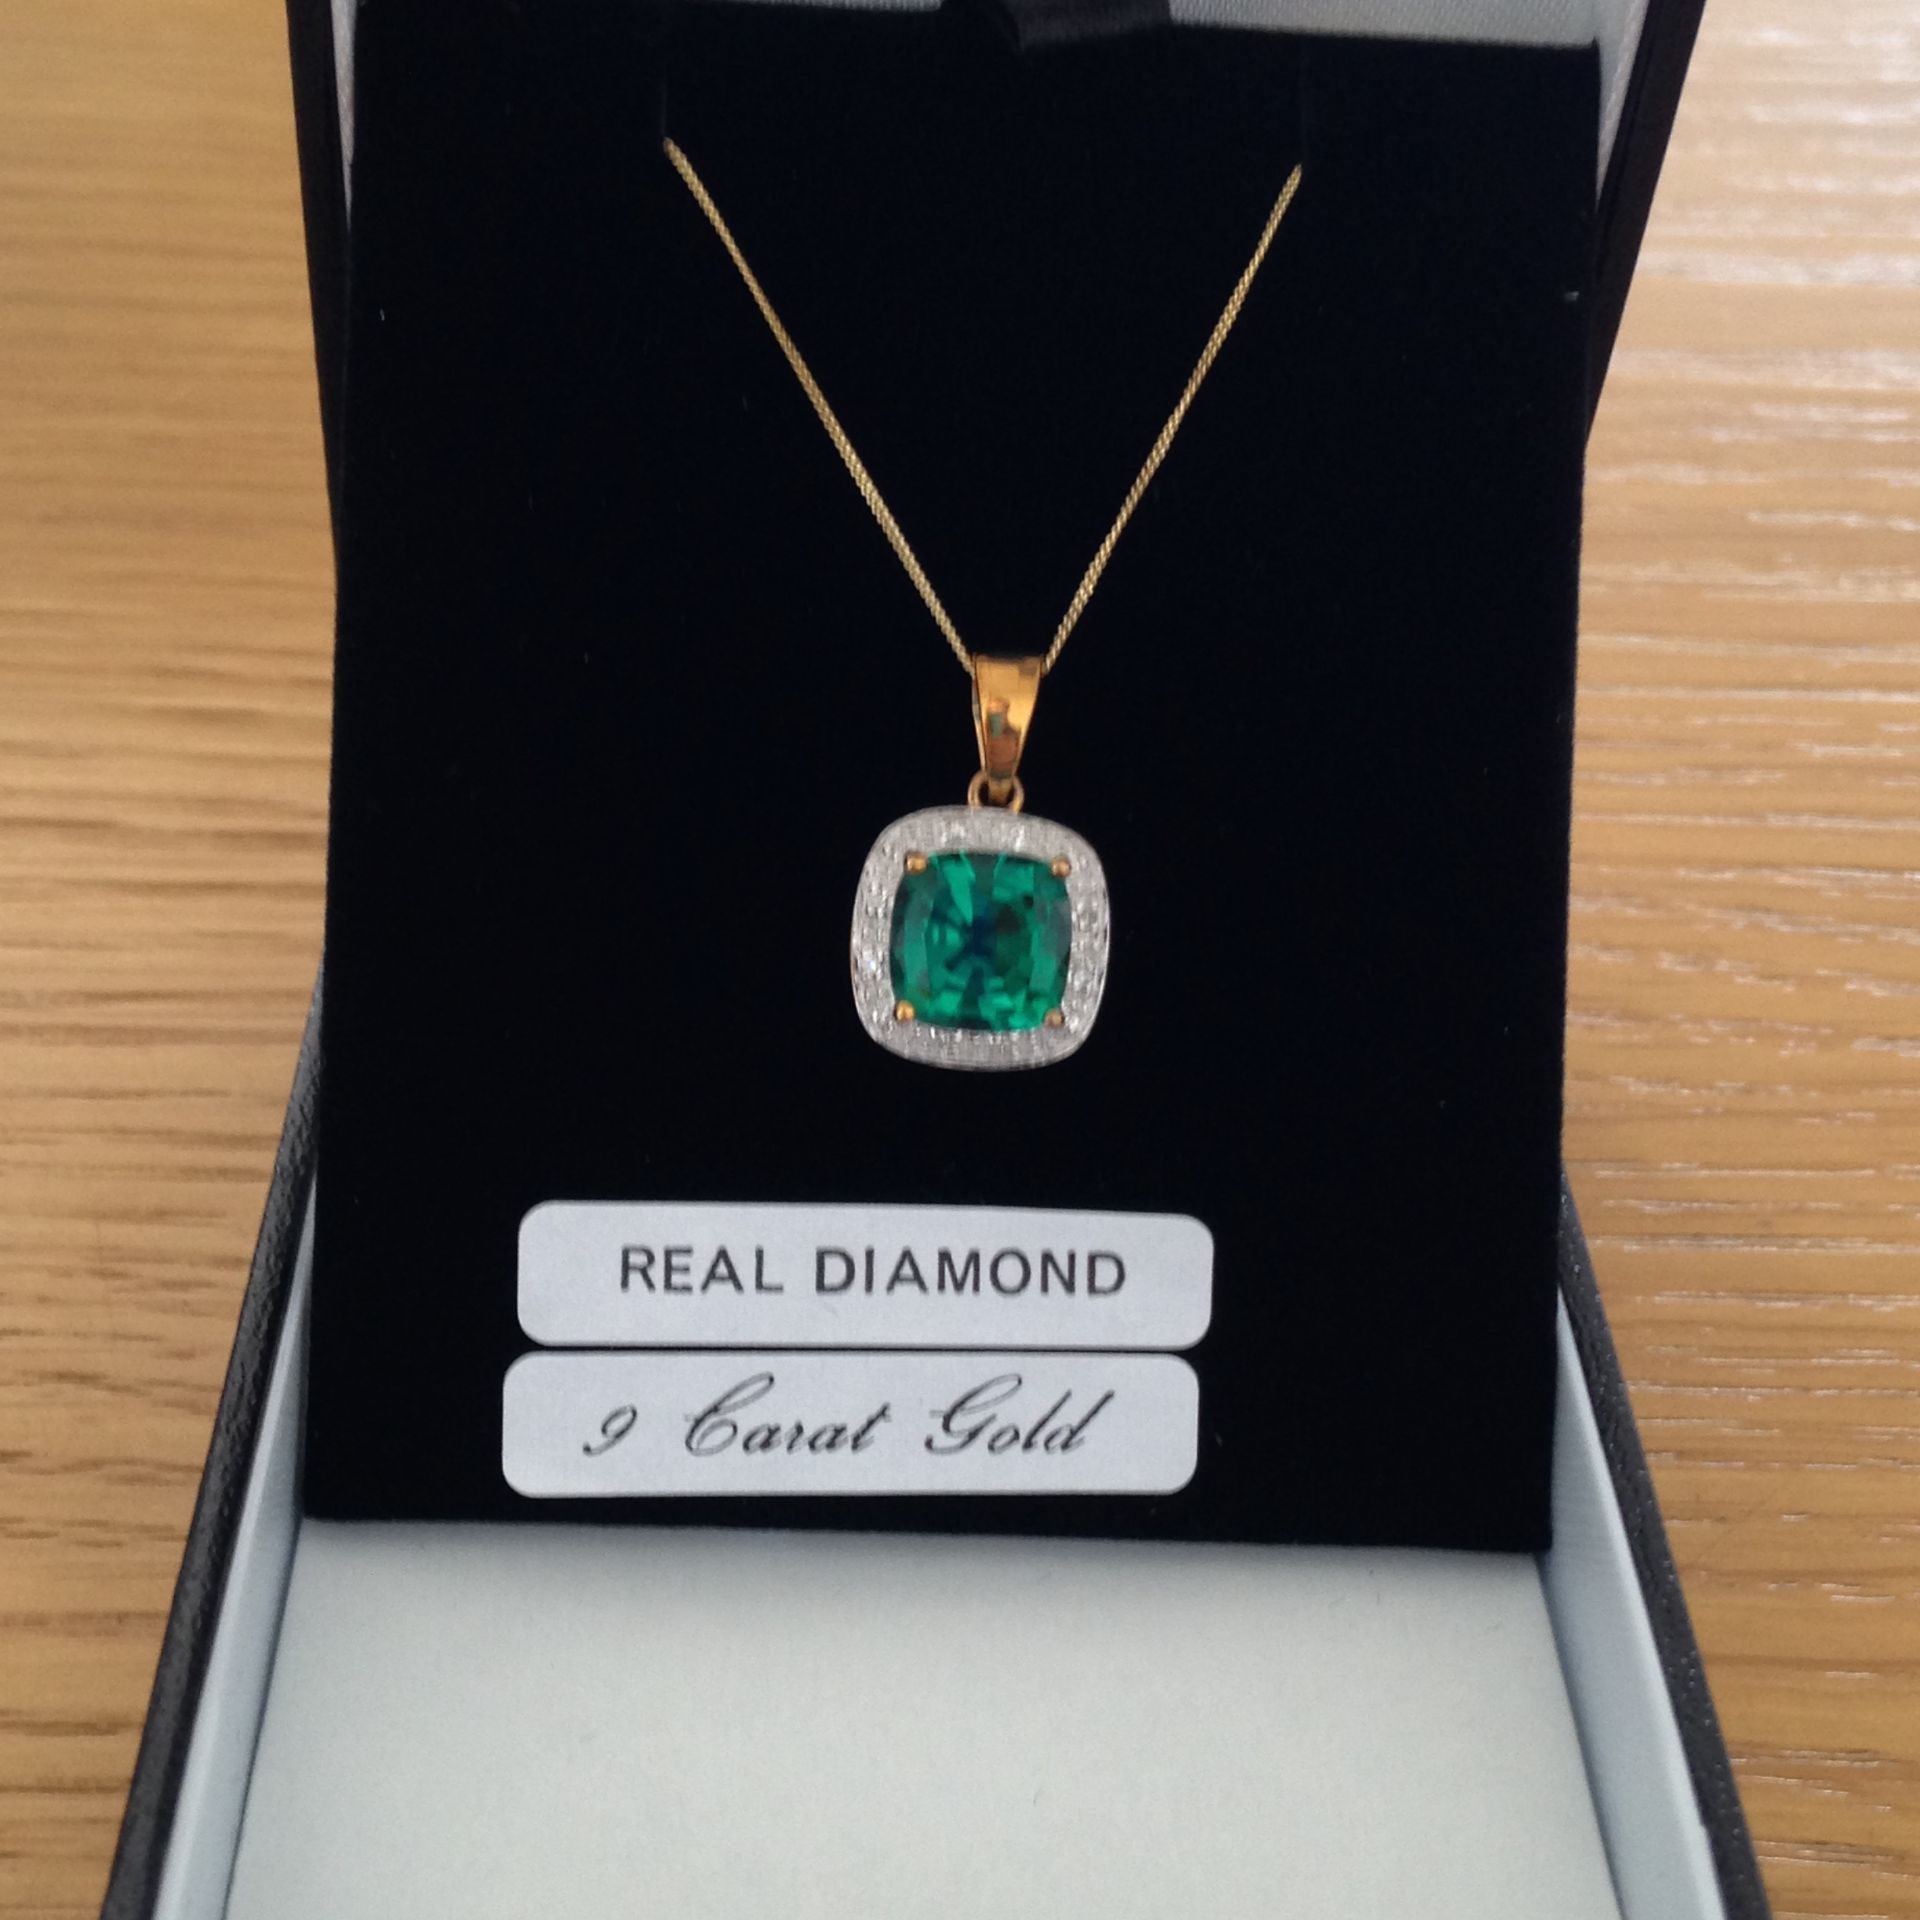 9ct Gold Pendent Necklace with Green Stone with Diamonds